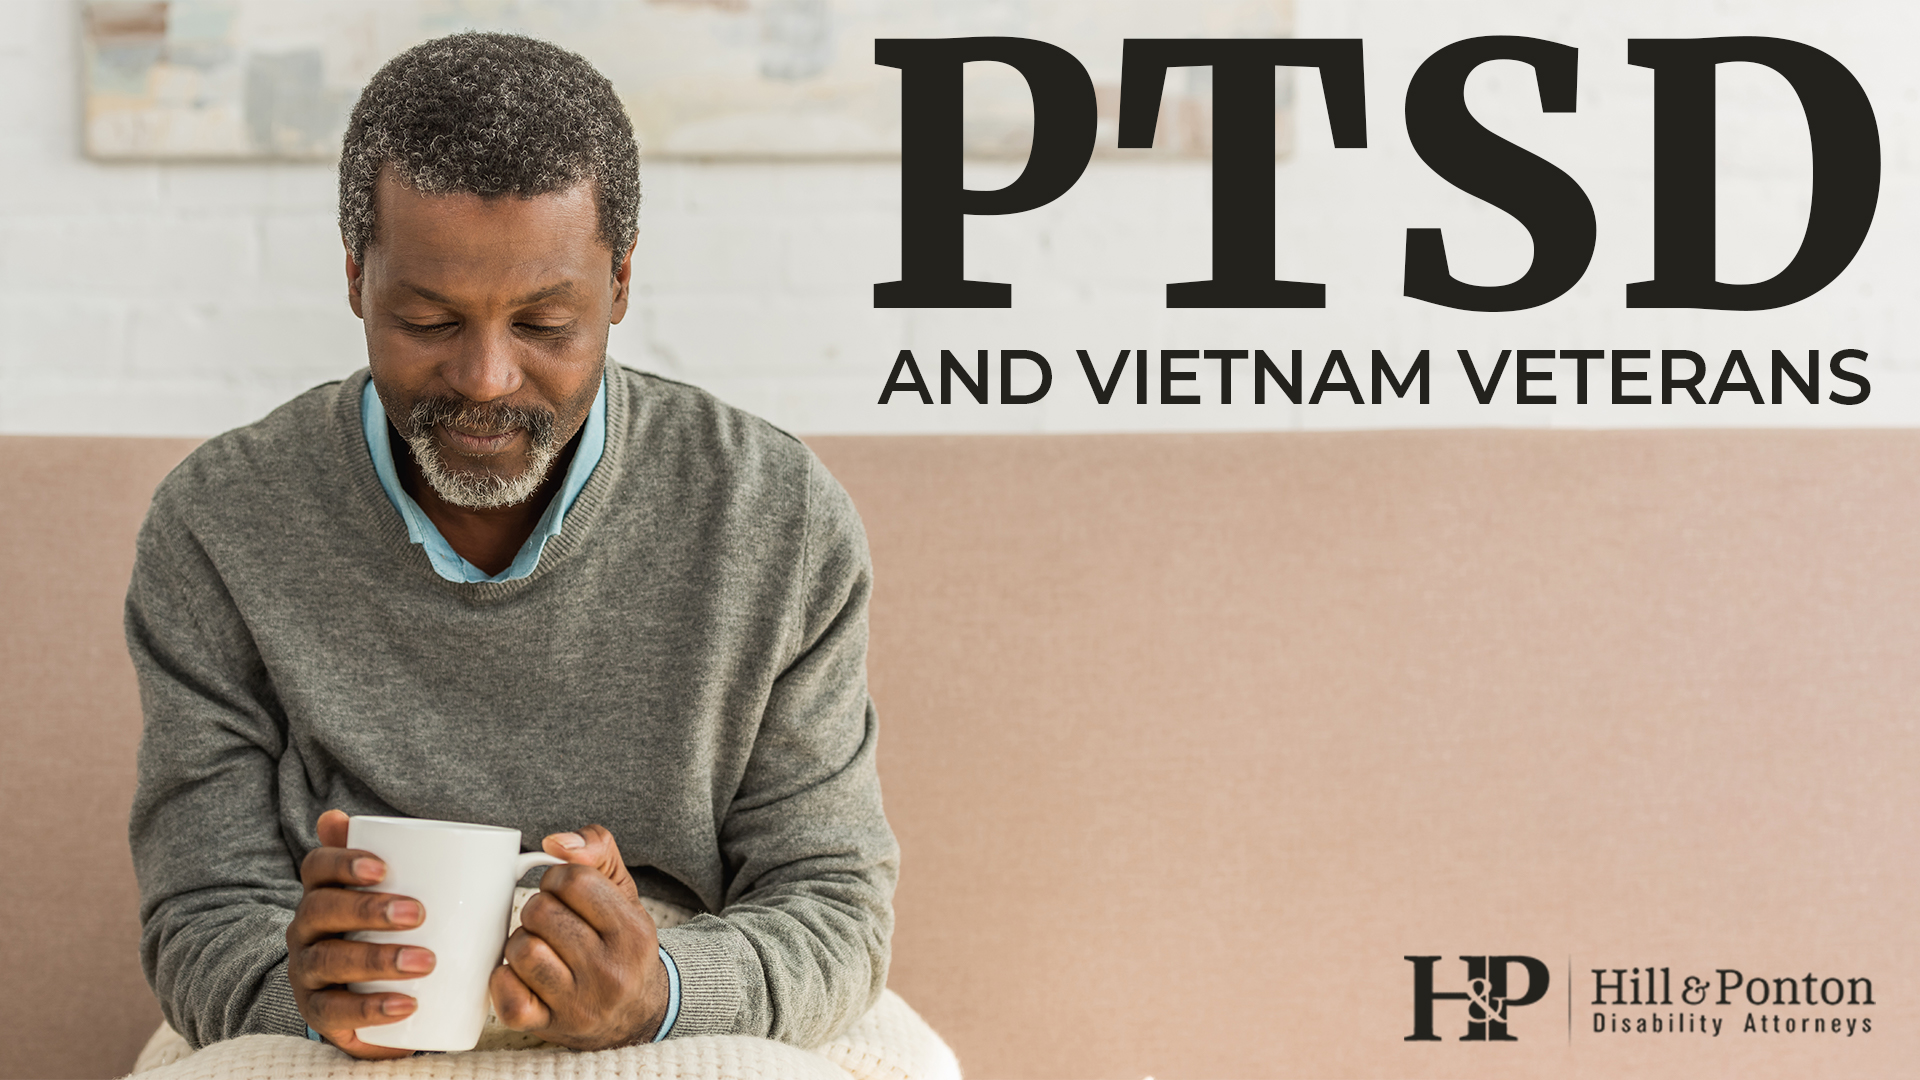 From shell shock to PTSD: proof of war's traumatic history